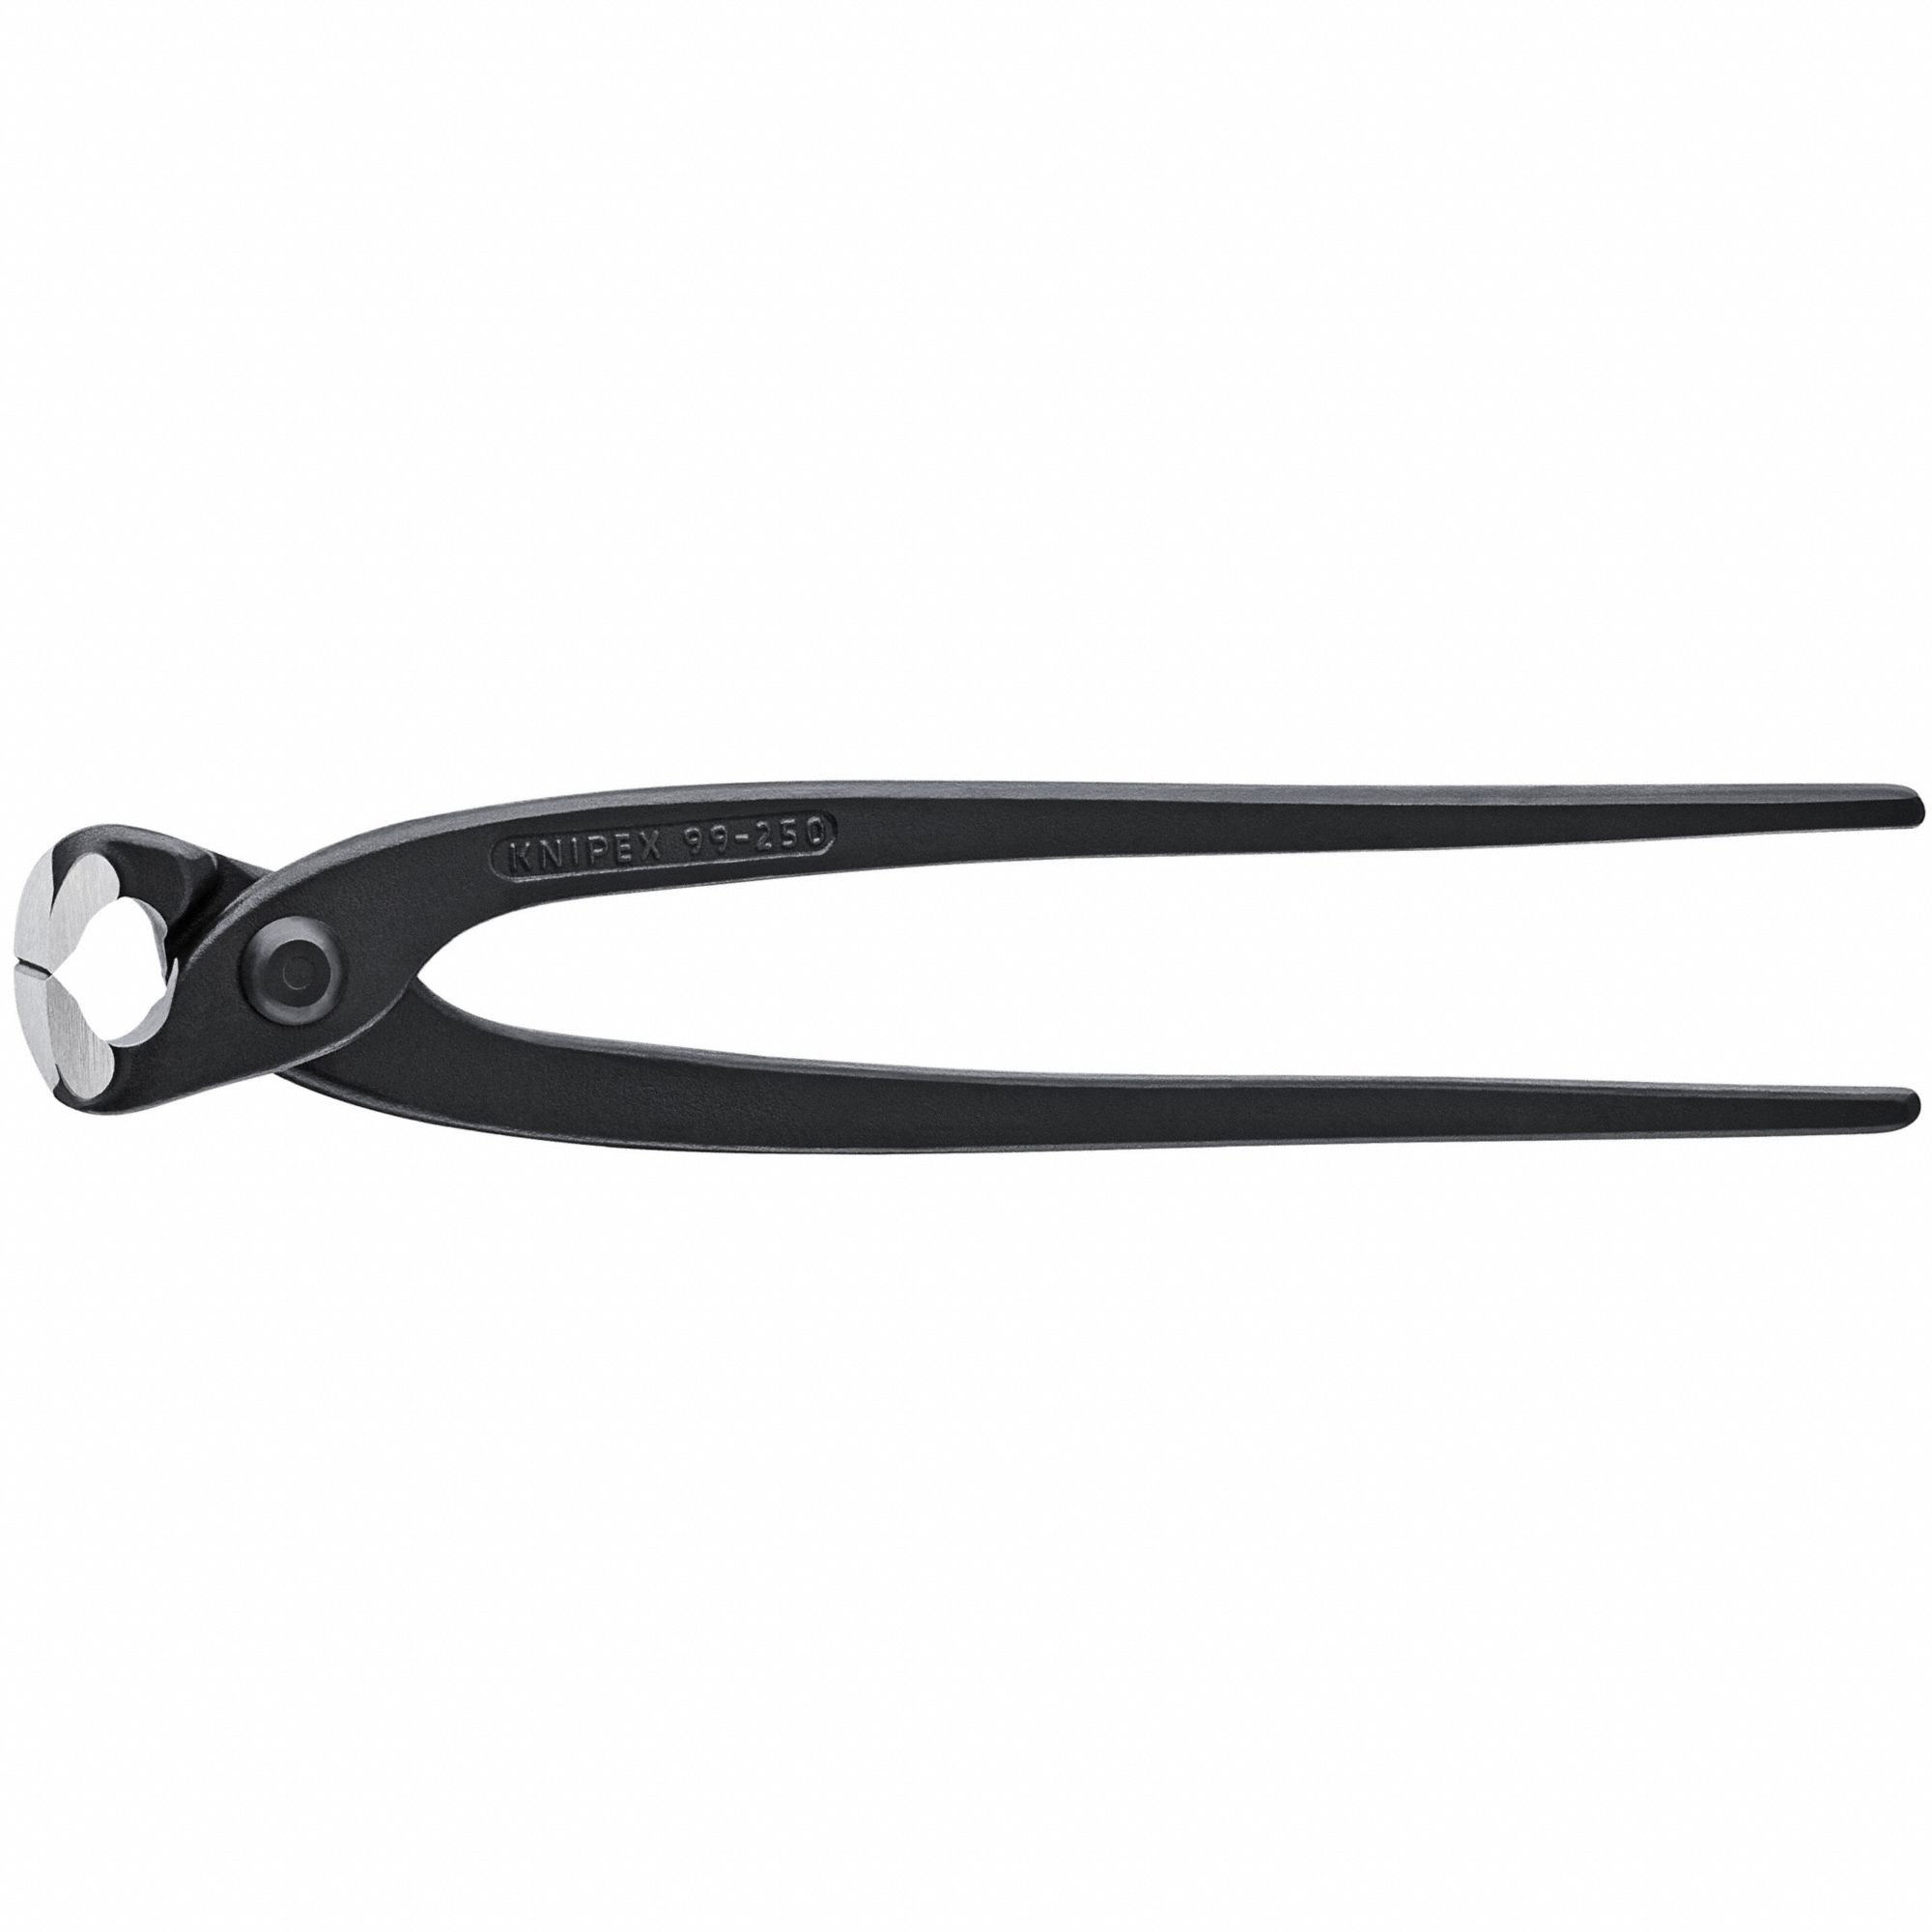 End Cutting Nippers: 8 3/4 in Overall Lg, For 0.09 in Max Wire Thick, Steel, Steel